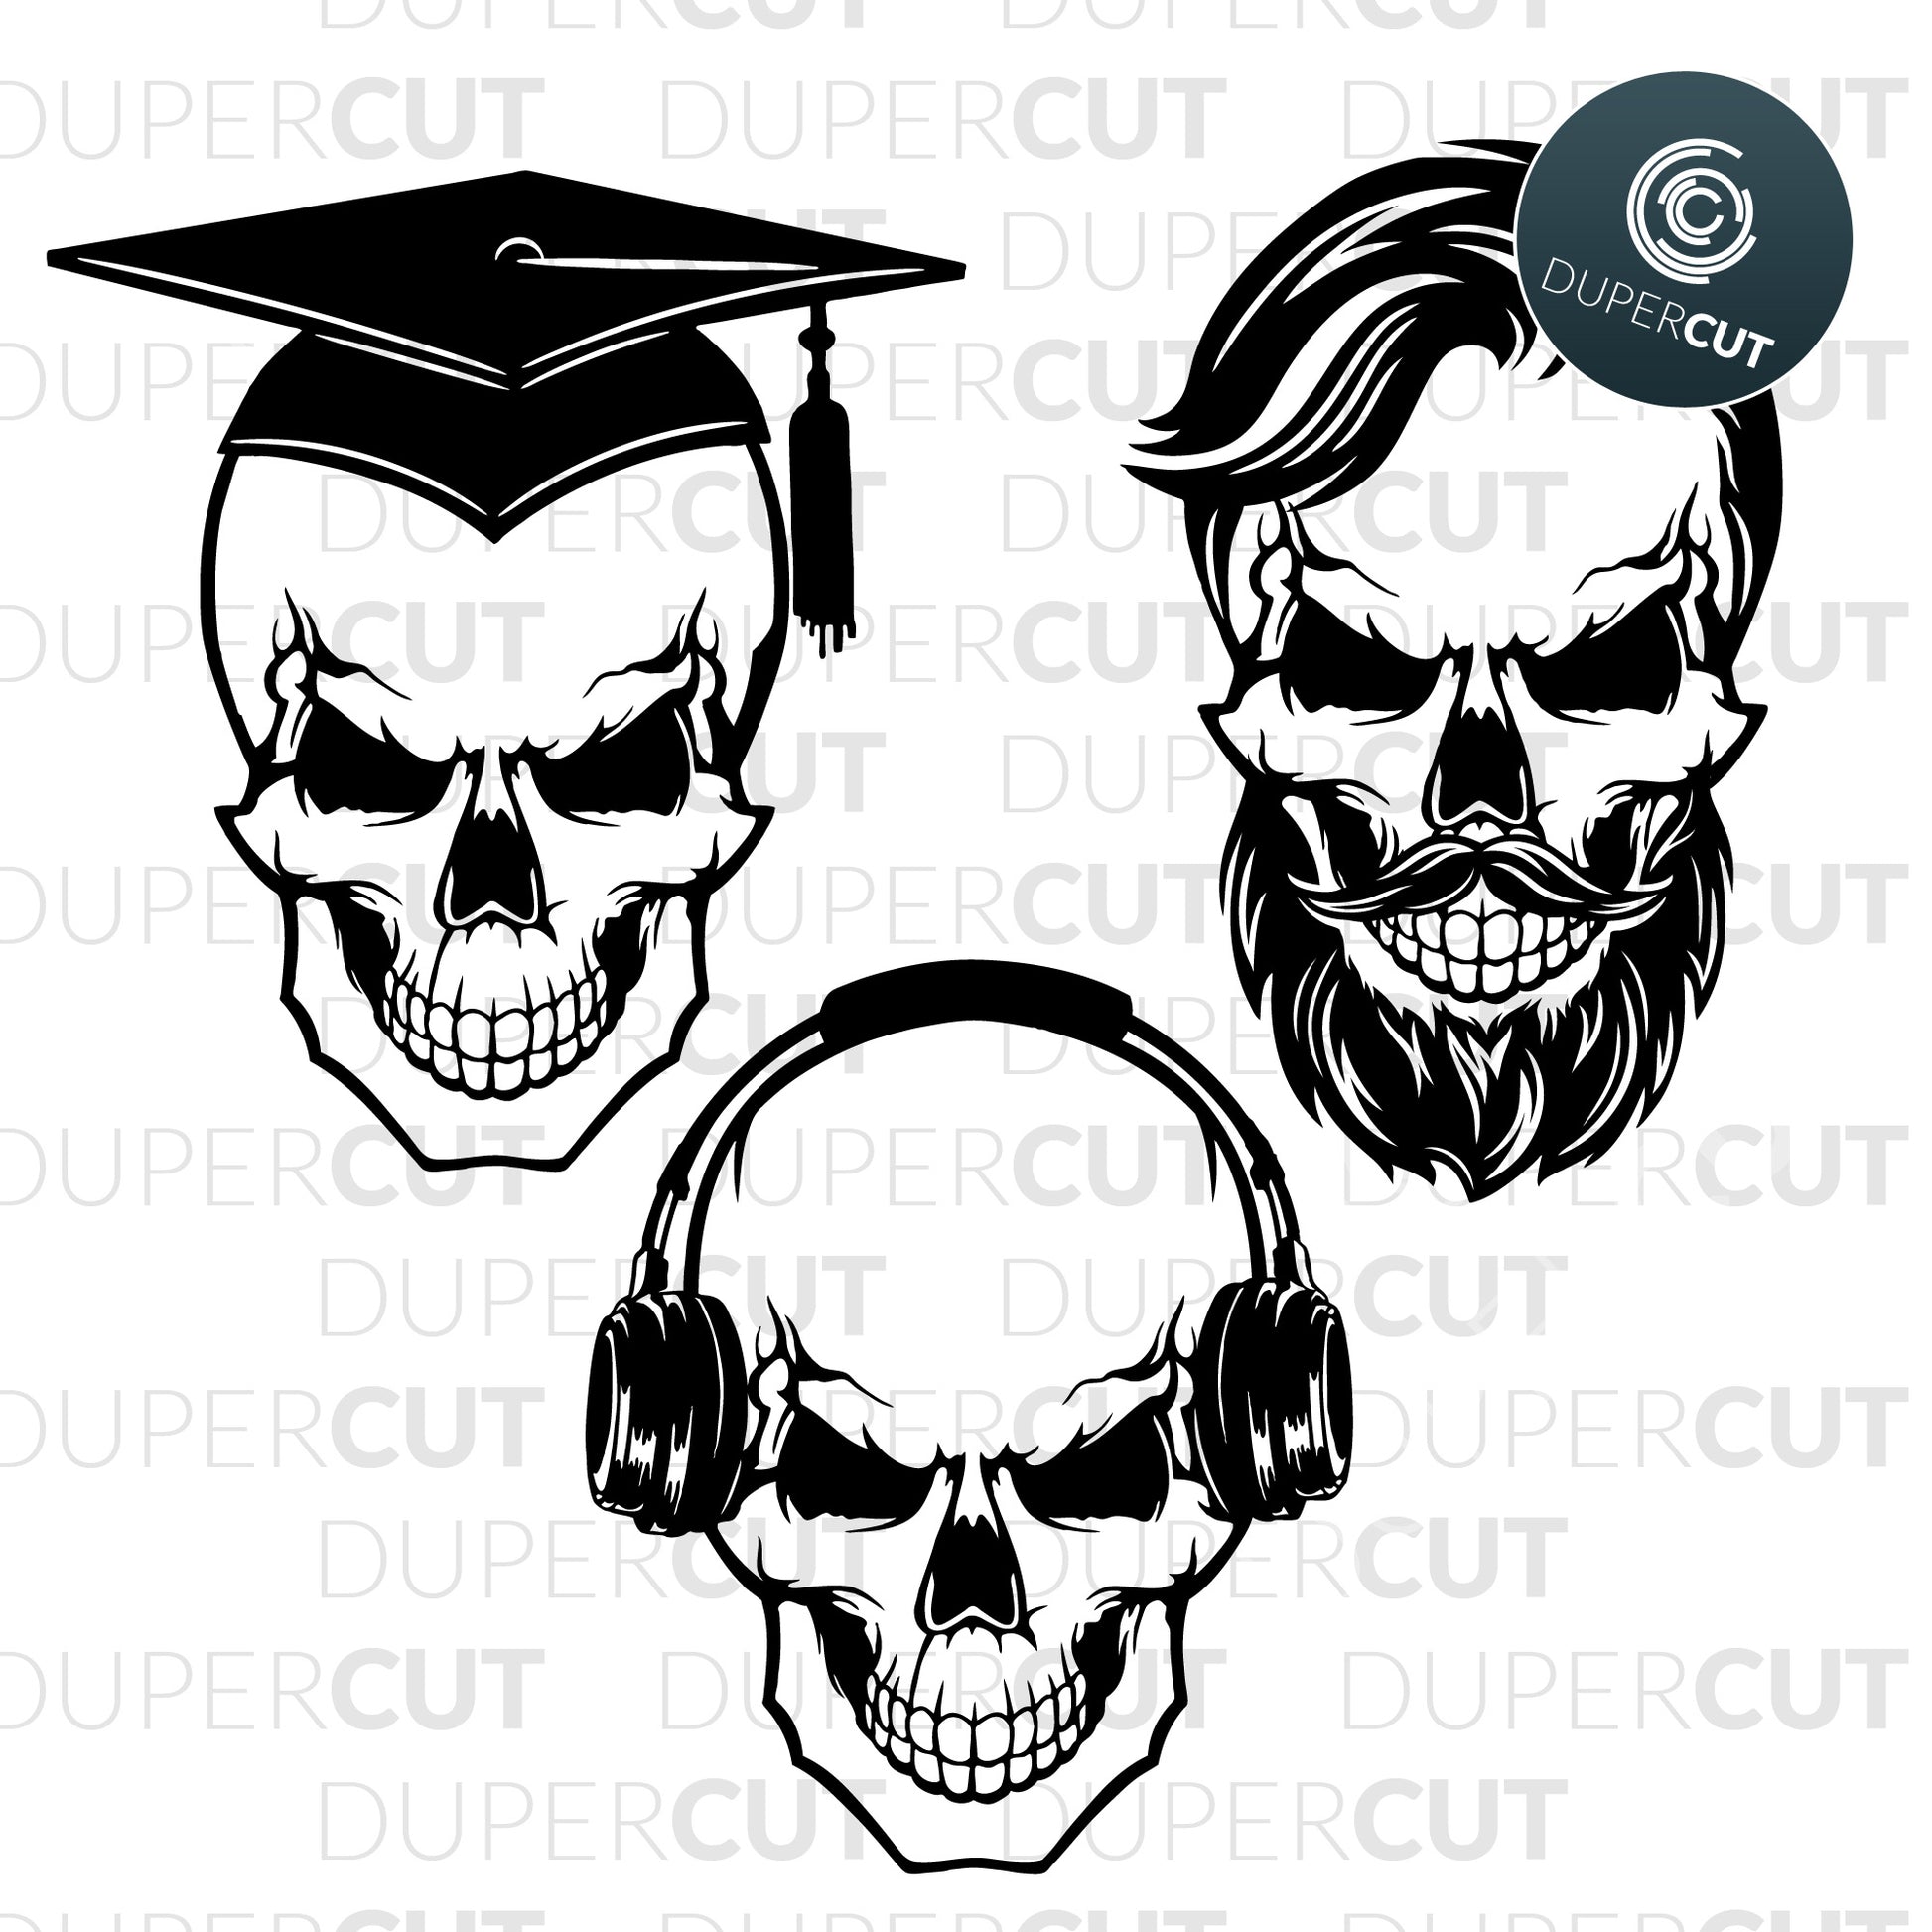 Skull with headphones, skull with beard, skull with graduation hat. SVG PNG DXF cutting files for Cricut, Silhouette, Glowforge, print on demand, sublimation templates